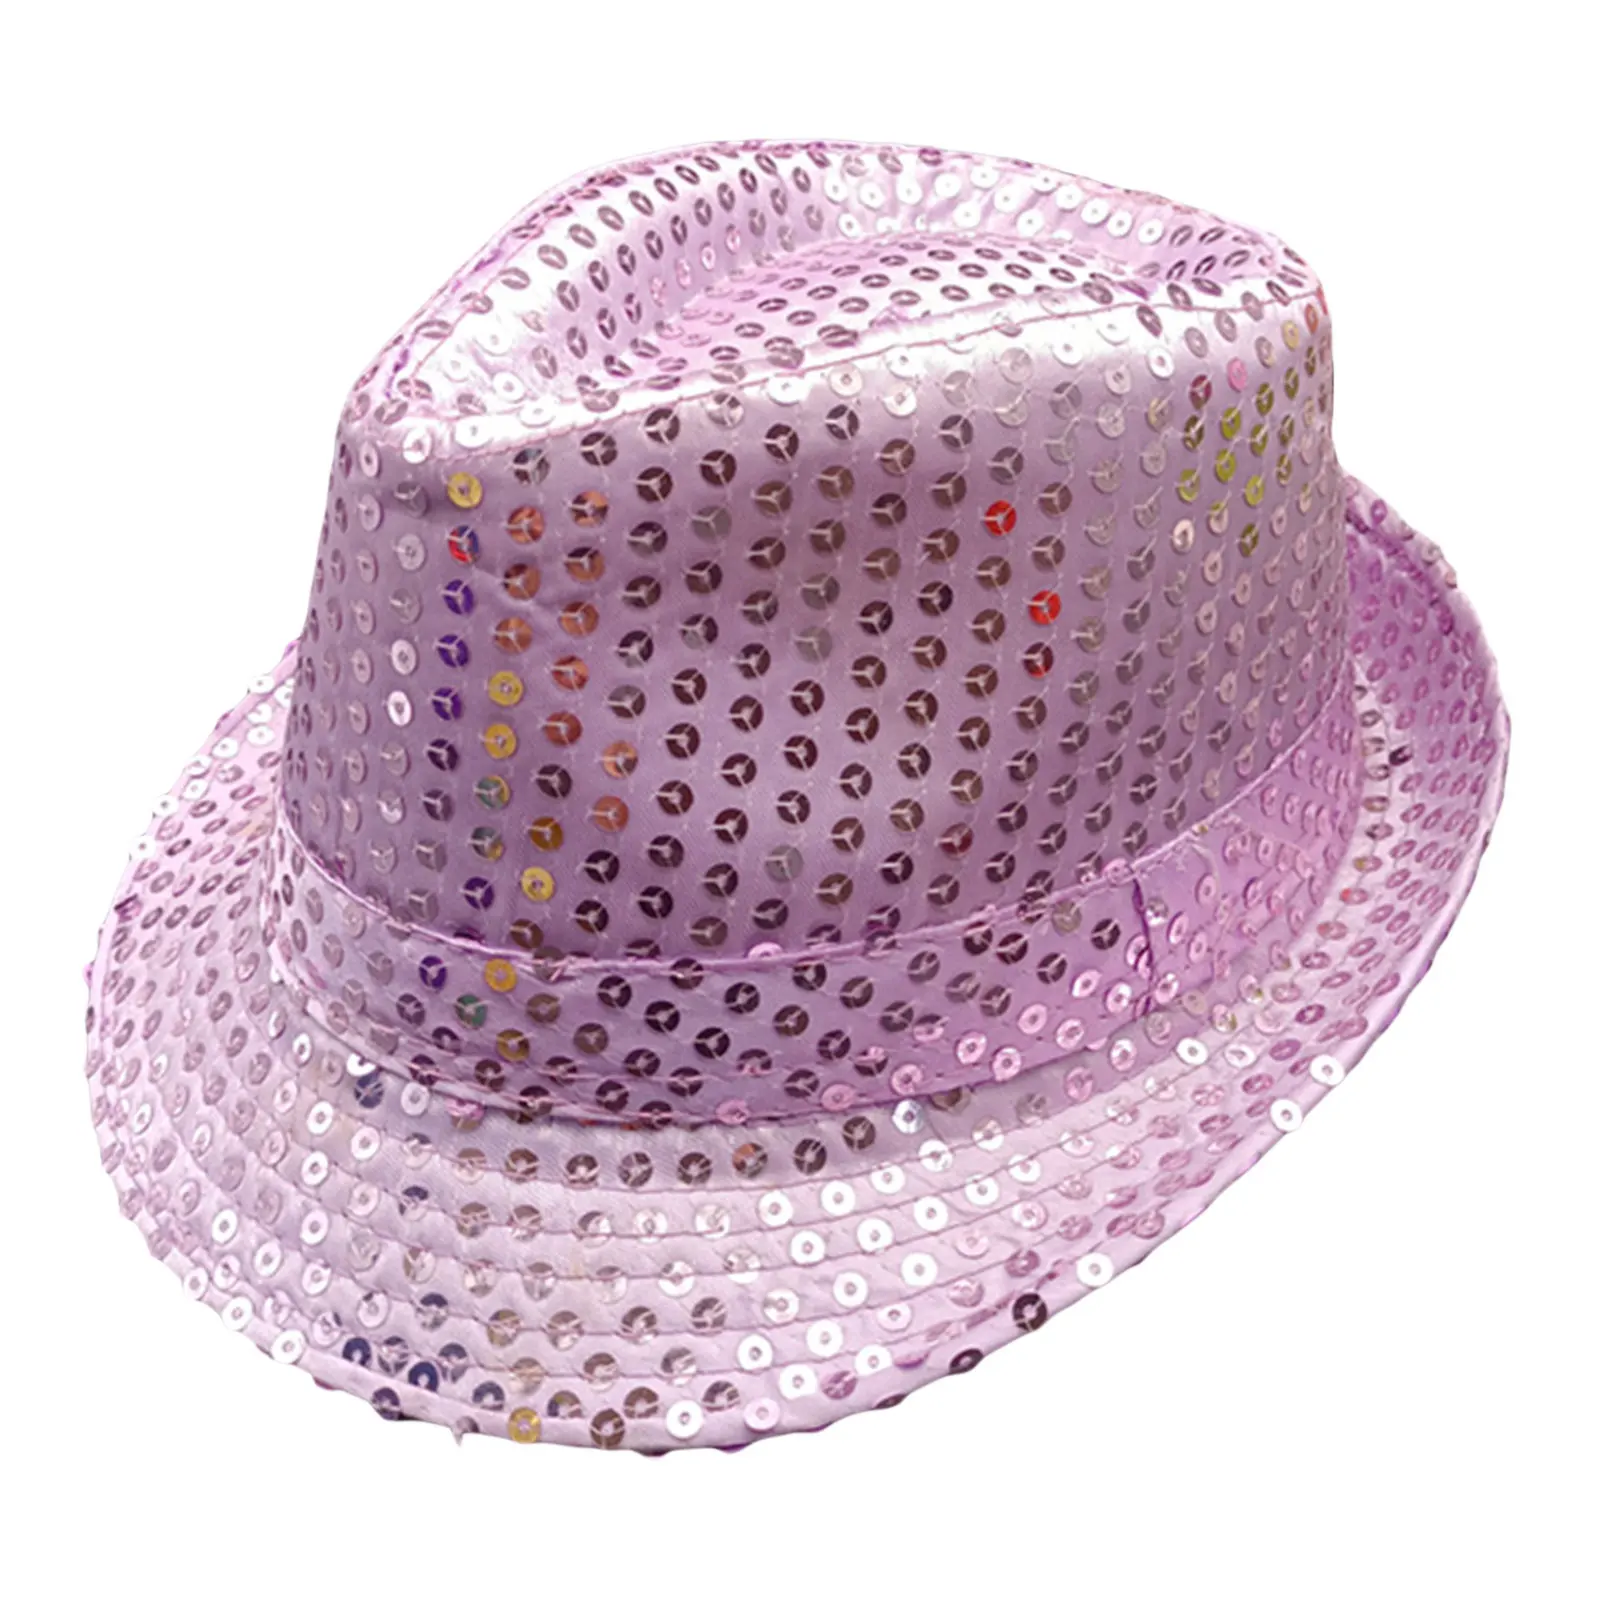  - 12 Colors Men Women Jazz Hat Sequins Decorated Stage Dance Performance Party Holiday Hat